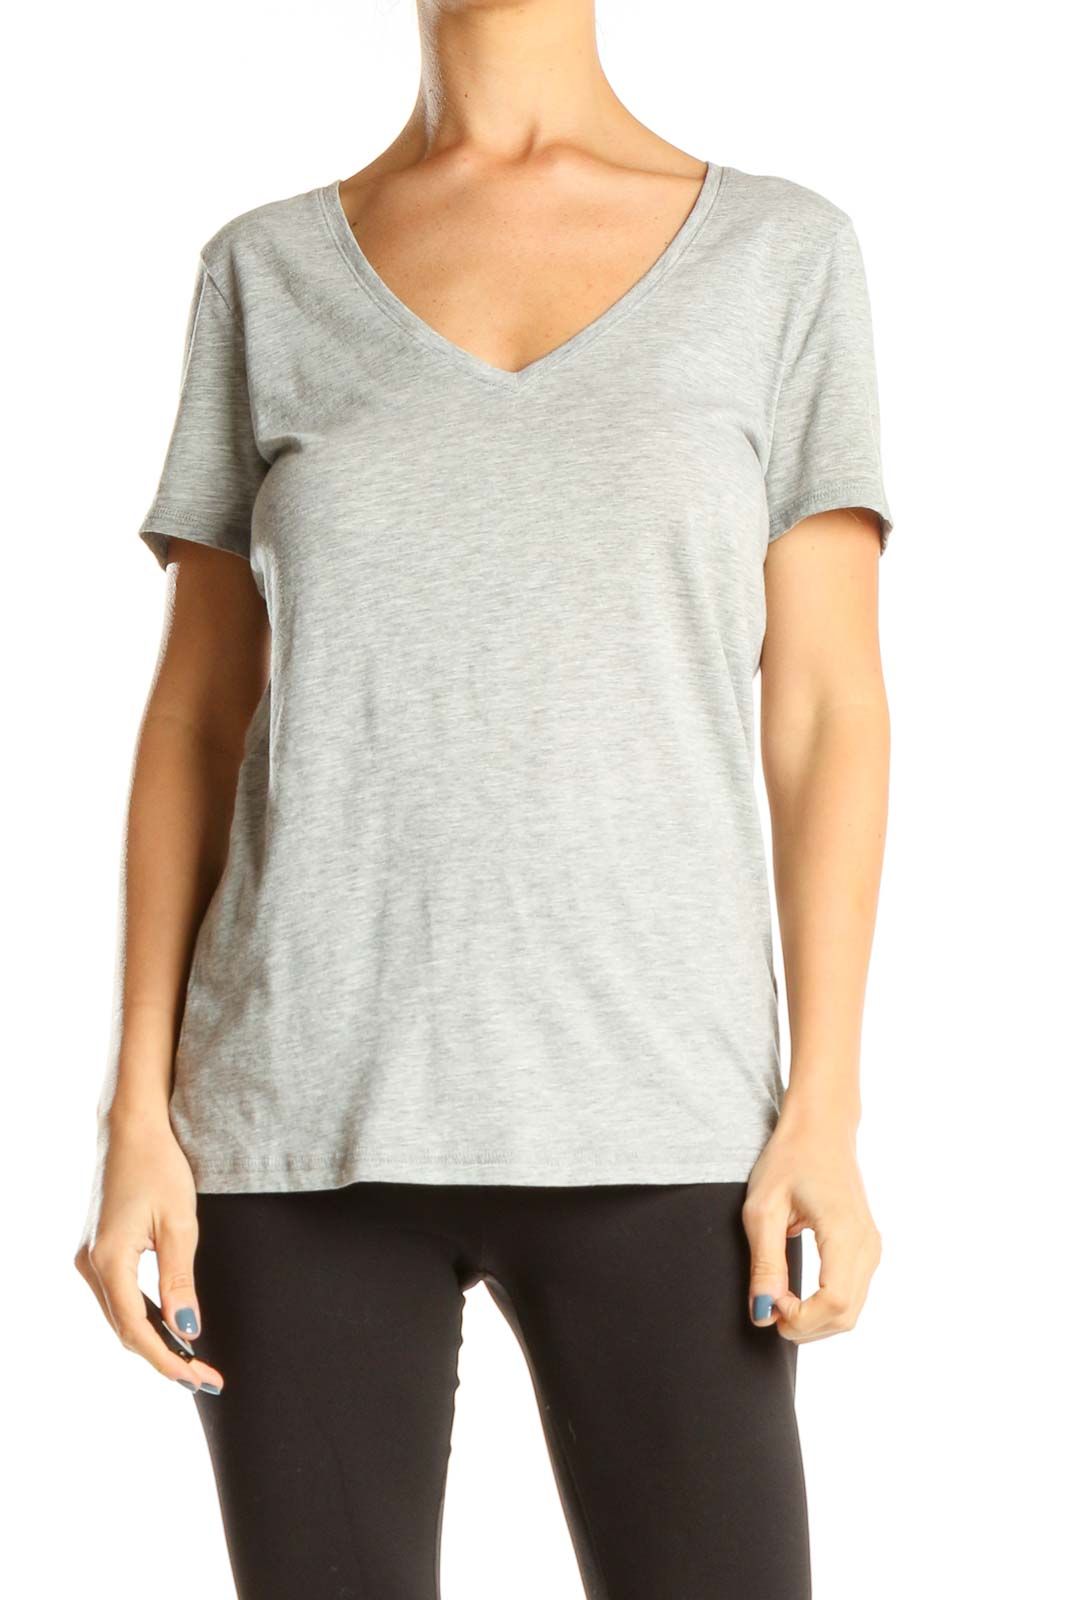 Gray Casual T-Shirt Front